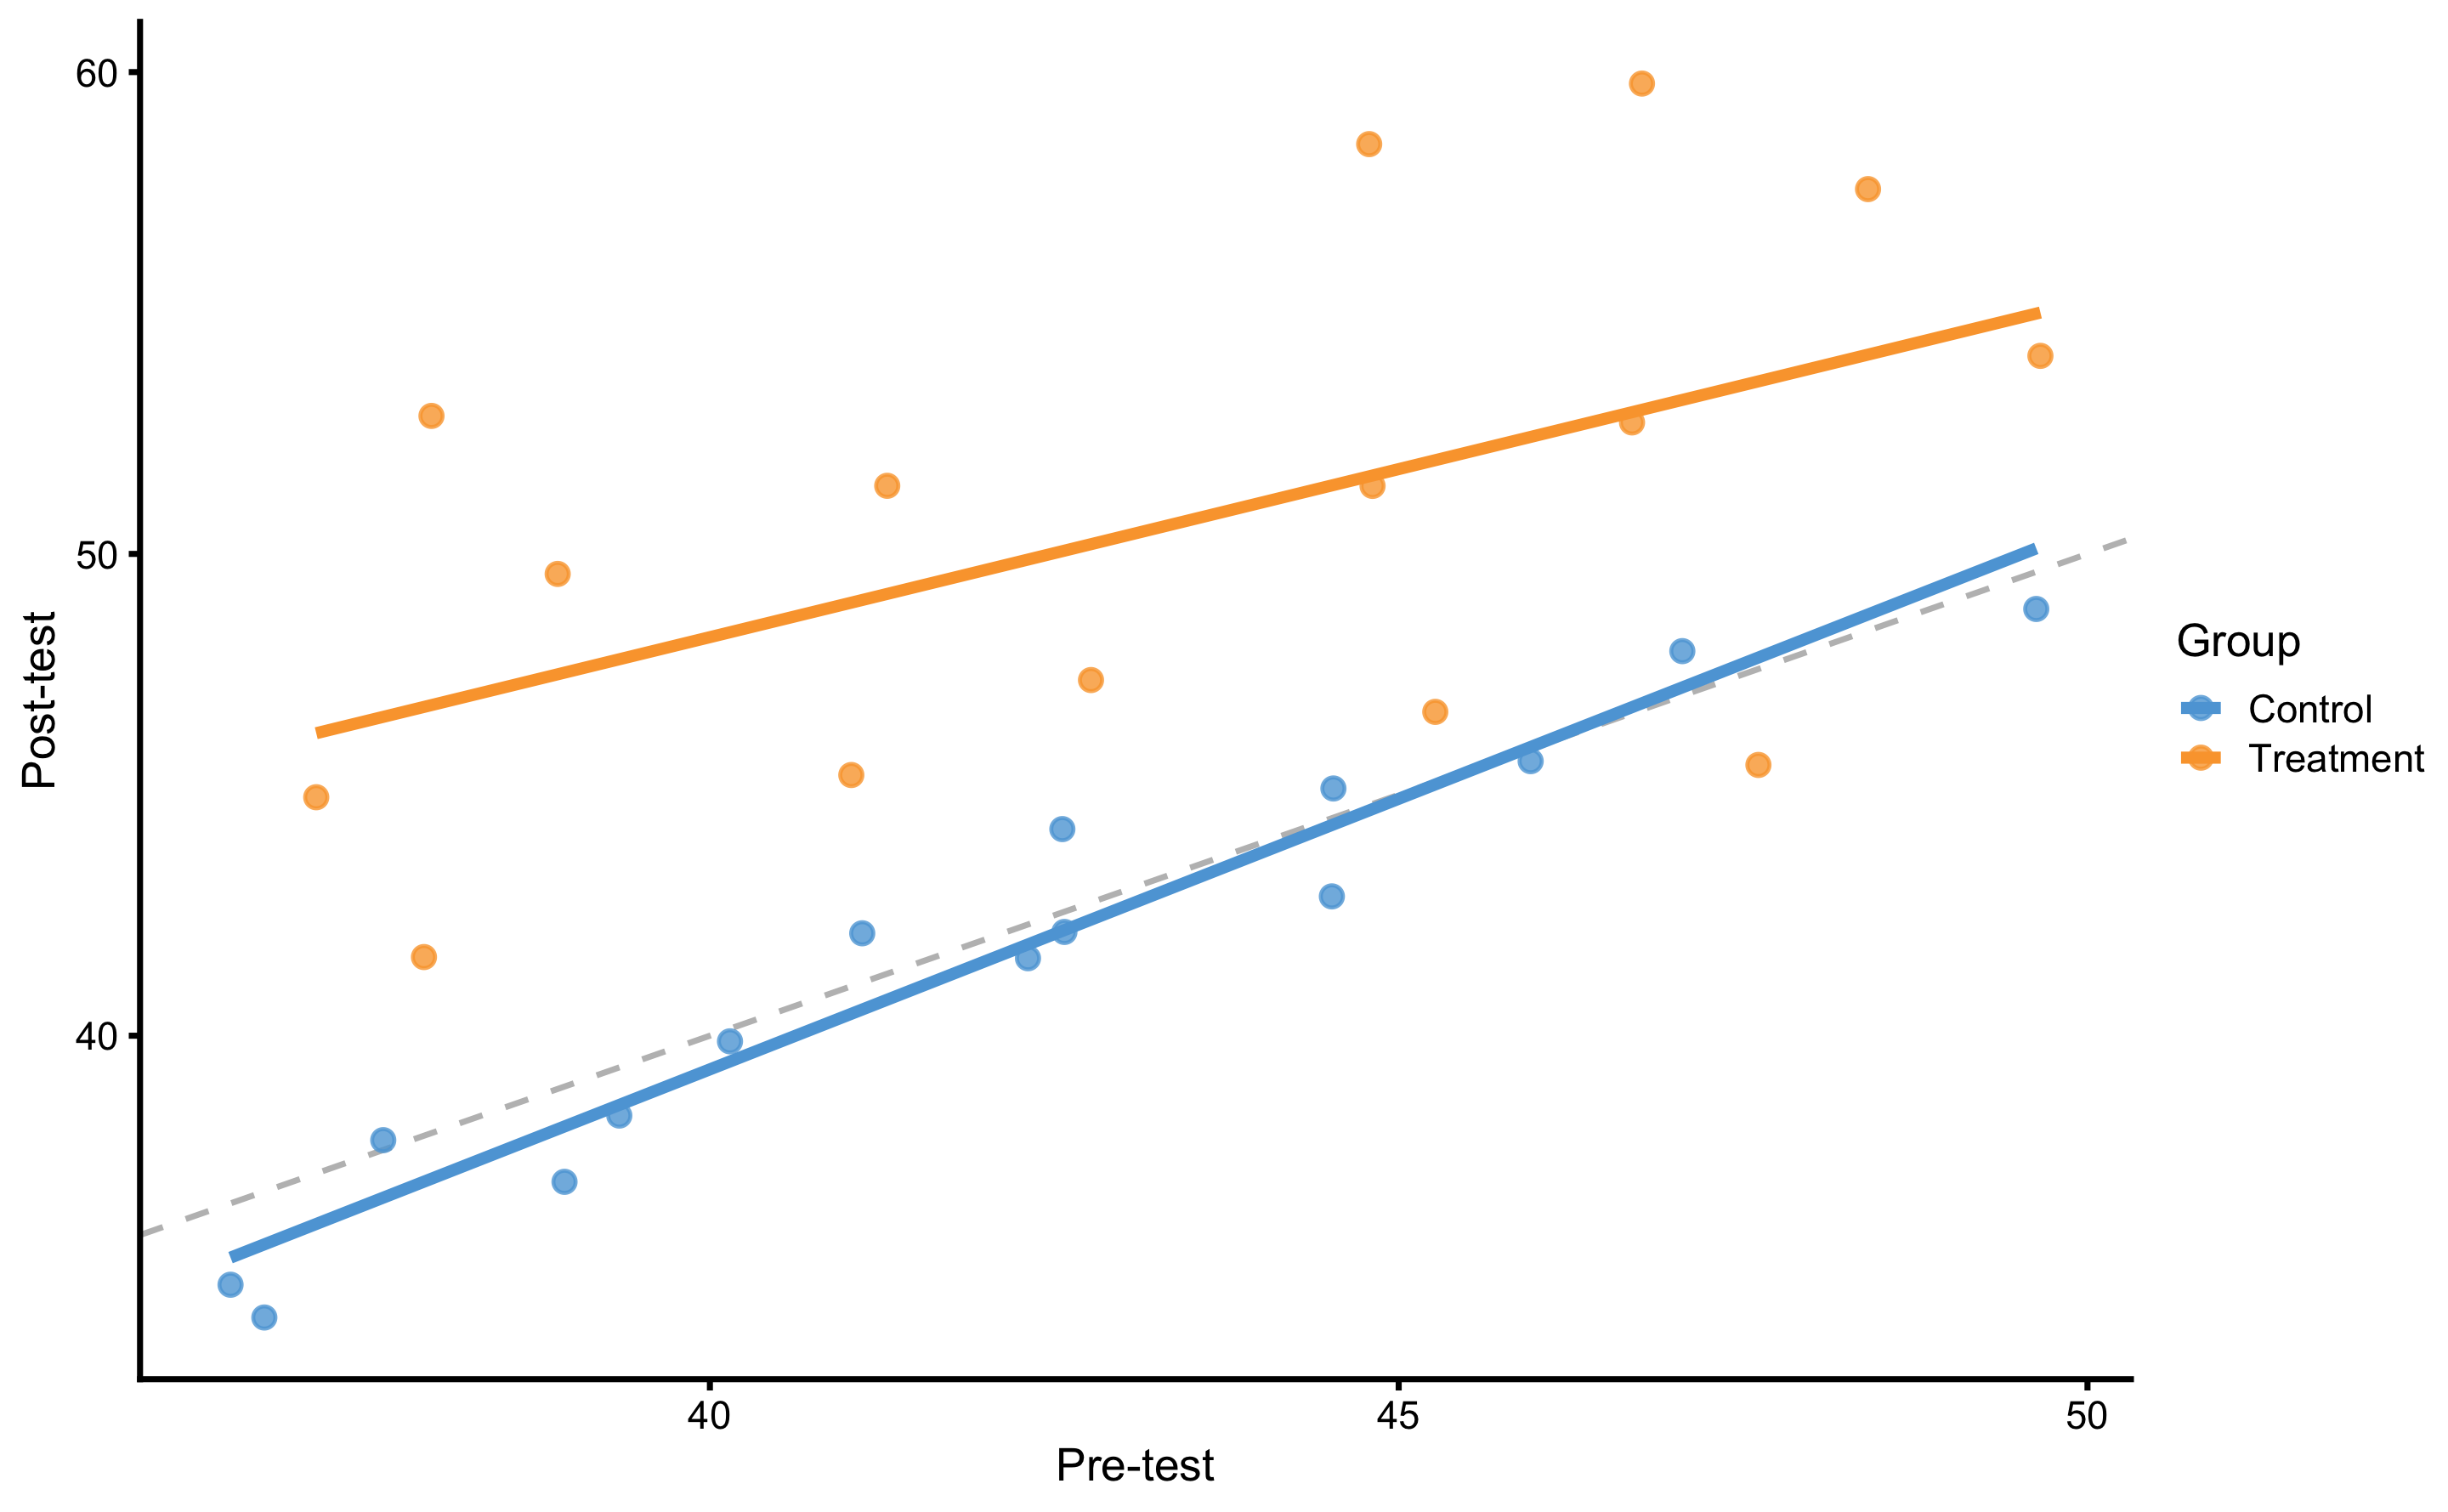 Graphical representation of the valid way to analyze RCT data. Dashed line represent identity line, where Post-test is equal to Pre-test (i.e., the no effect line). The effect of treatment represents vertical distance between the Control and Treatment lines. This is easily grasped since the lines are almost perfectly parallel. If the lines are not parallel, that would imply there is interaction between Group and Pre-test (i.e. individuals with higher Pre-test scores shows higher or lower change).